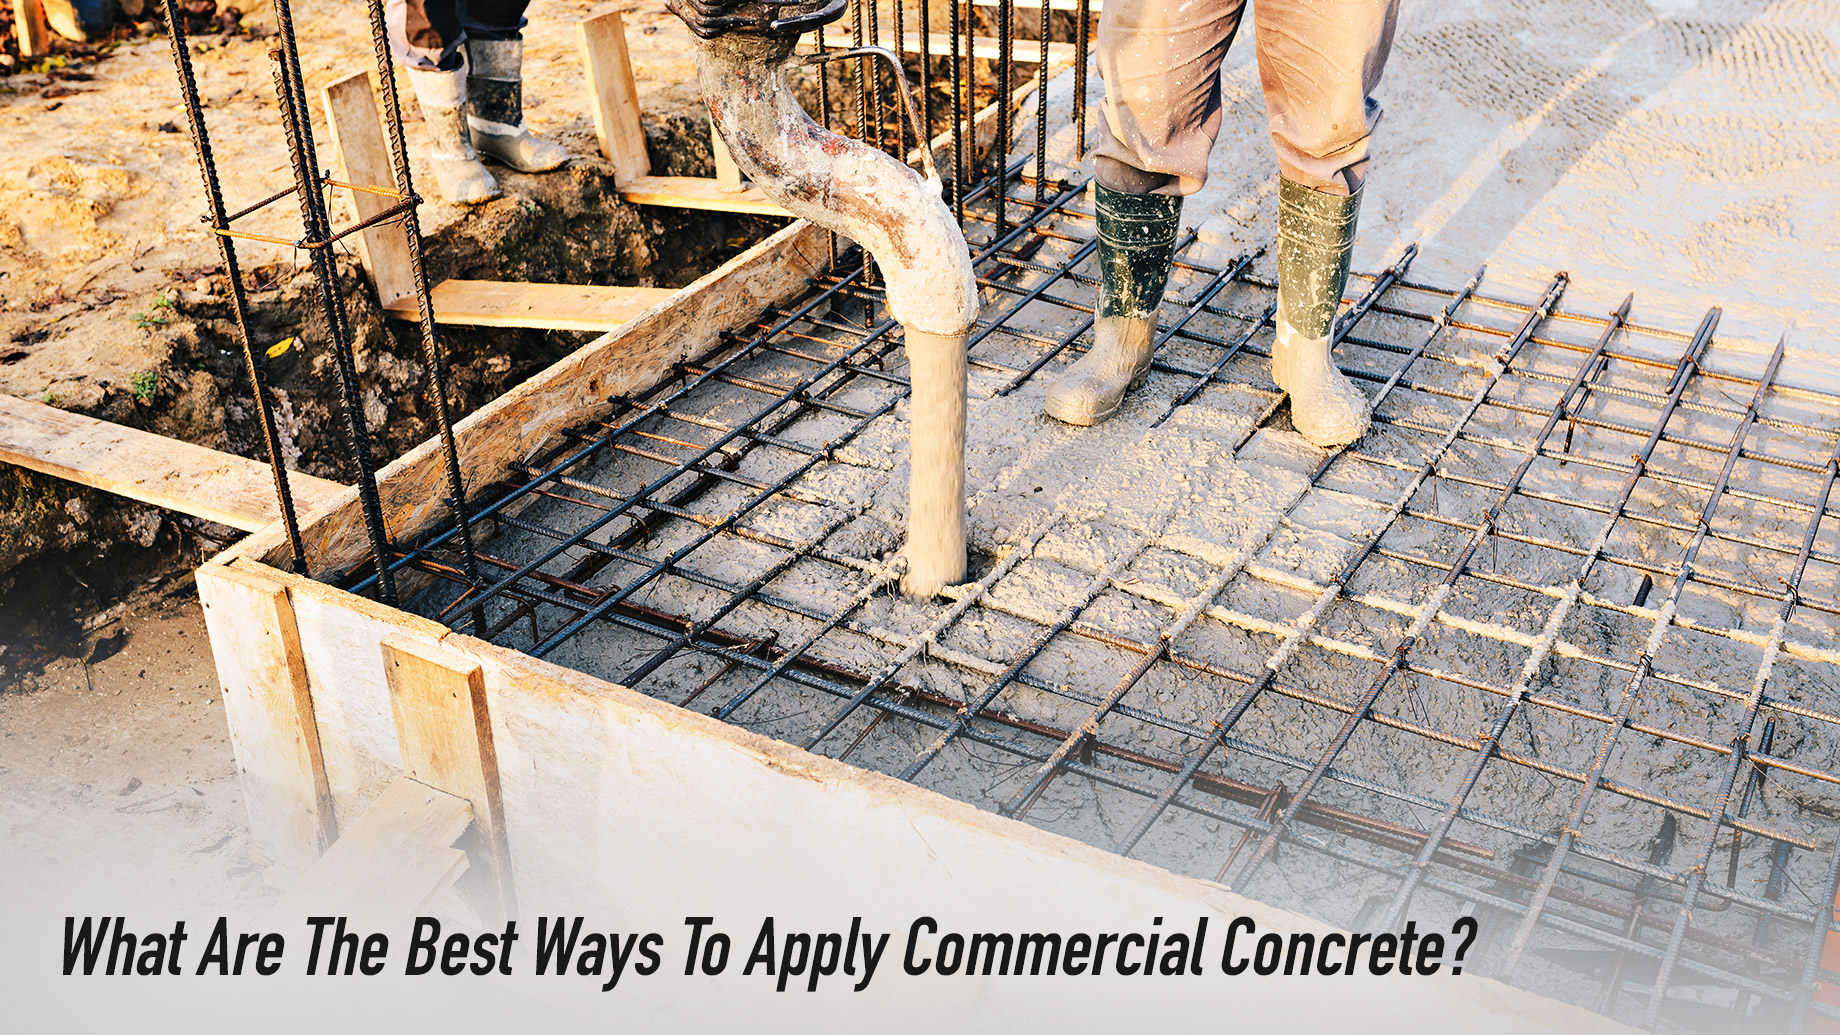 What Are The Best Ways To Apply Commercial Concrete?